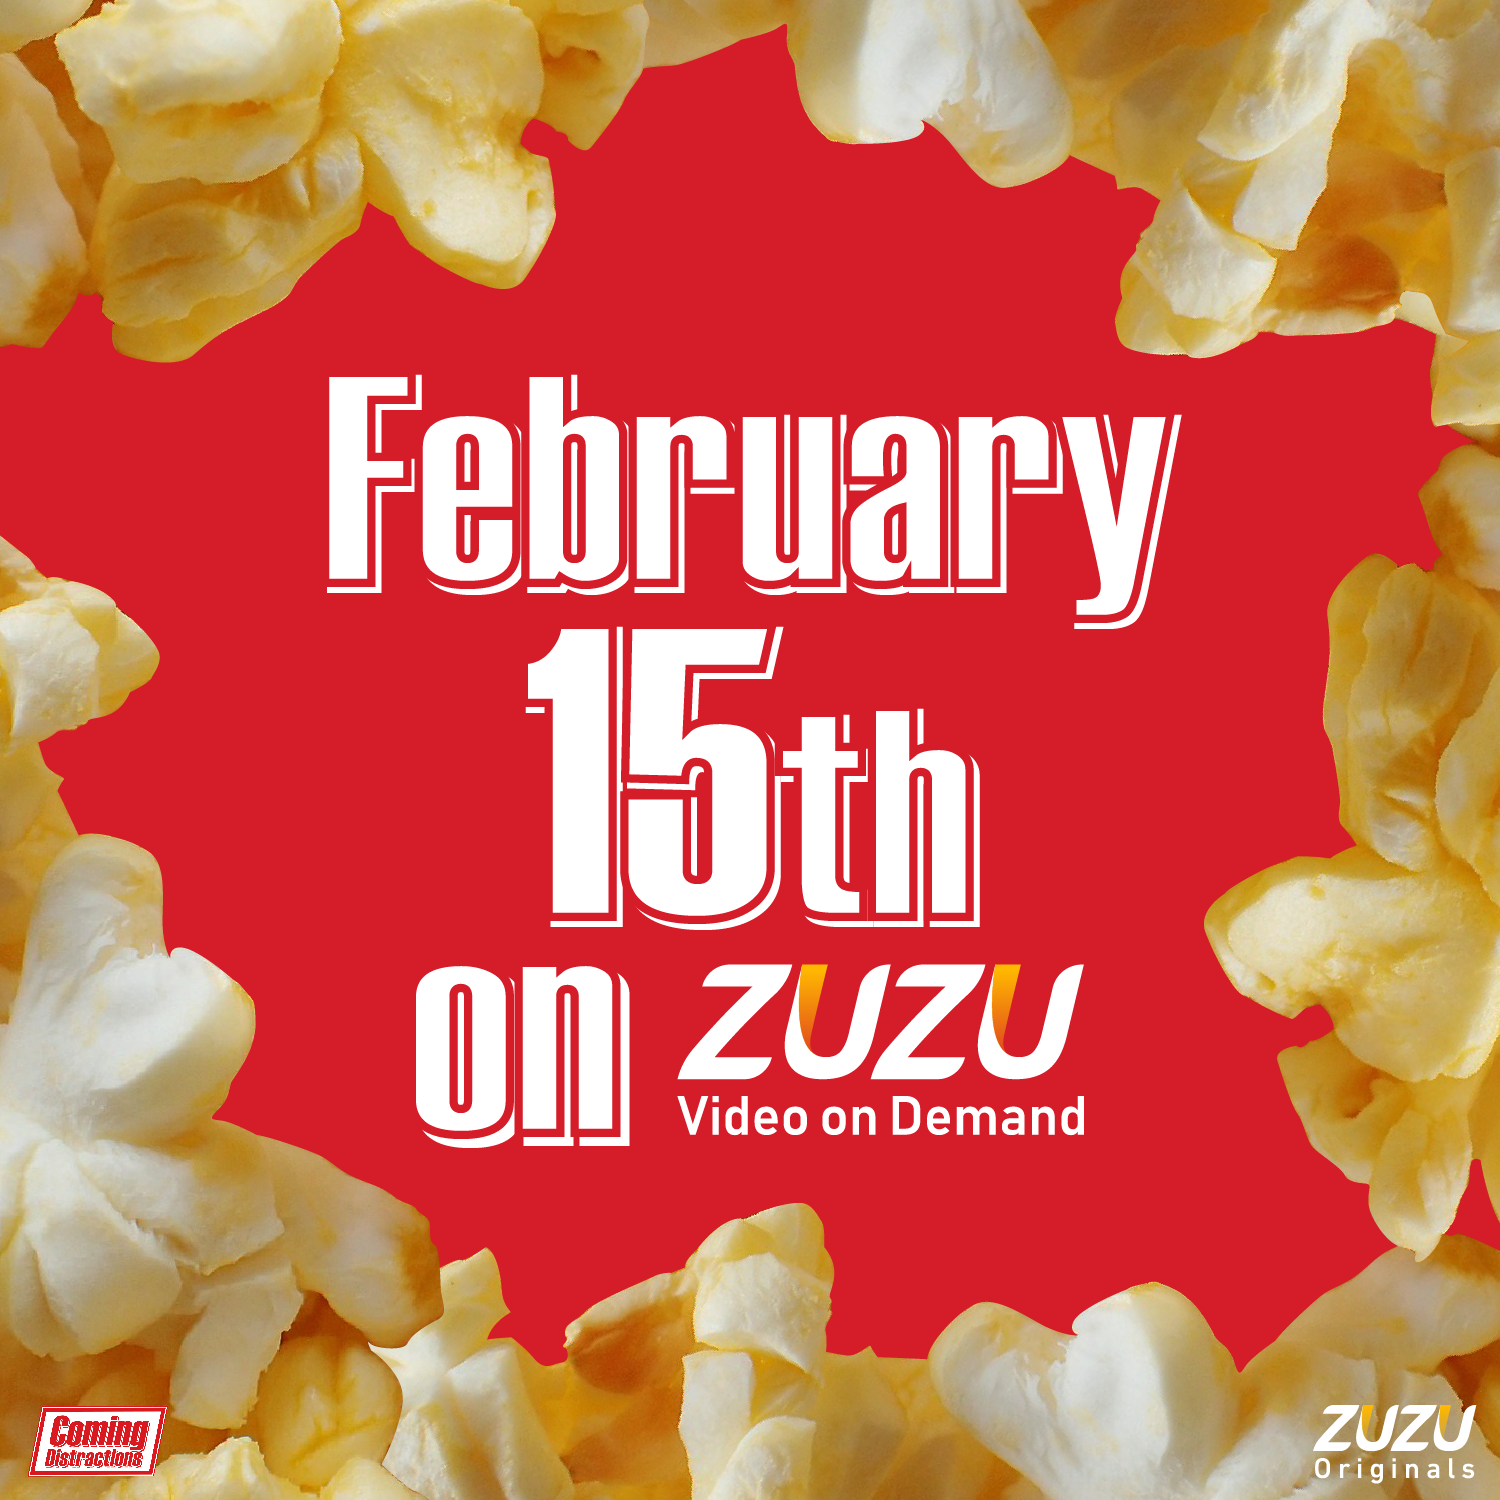 Text on a red background surrounded by popcorn: "February 15th on Zuzu Video on Demand"